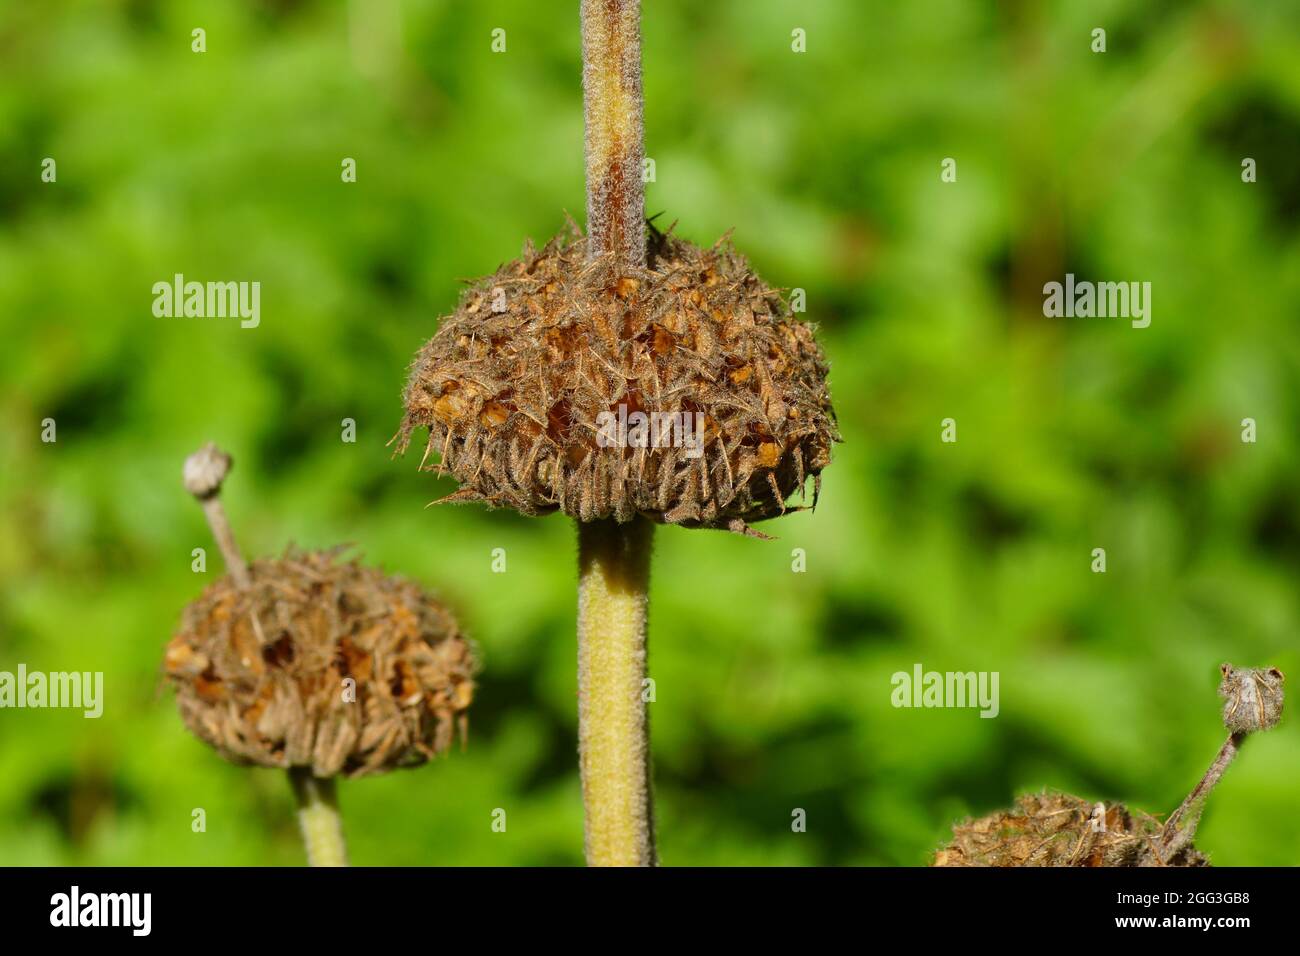 Close up flower seed pods of Turkish sage (Phlomis russeliana) of the mint family Lamiaceae. In a Dutch garden. Summer, August. Stock Photo